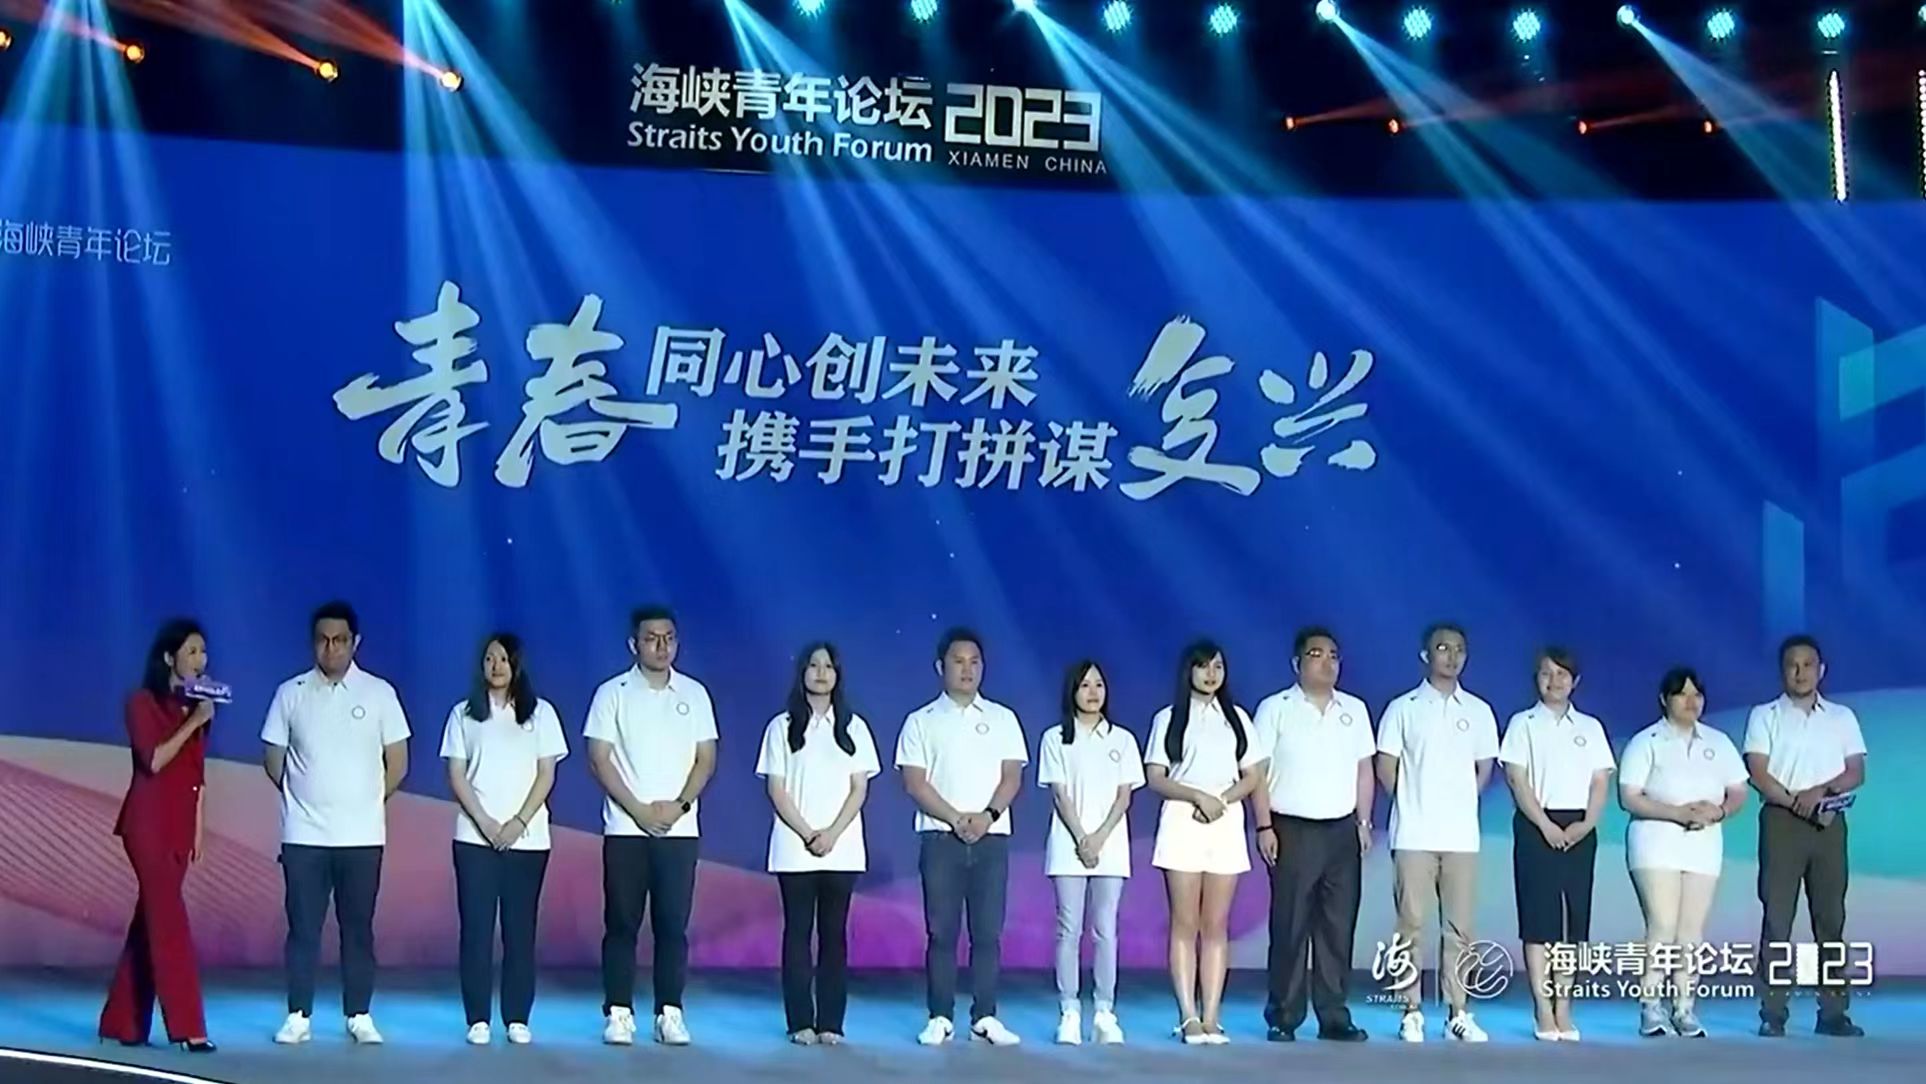  Representatives of young people from the Taiwan region share their experiences of receiving education and starting a career on the mainland, Xiamen, east China's Fujian Province, June 16, 2023. /Straits Youth Forum 2023